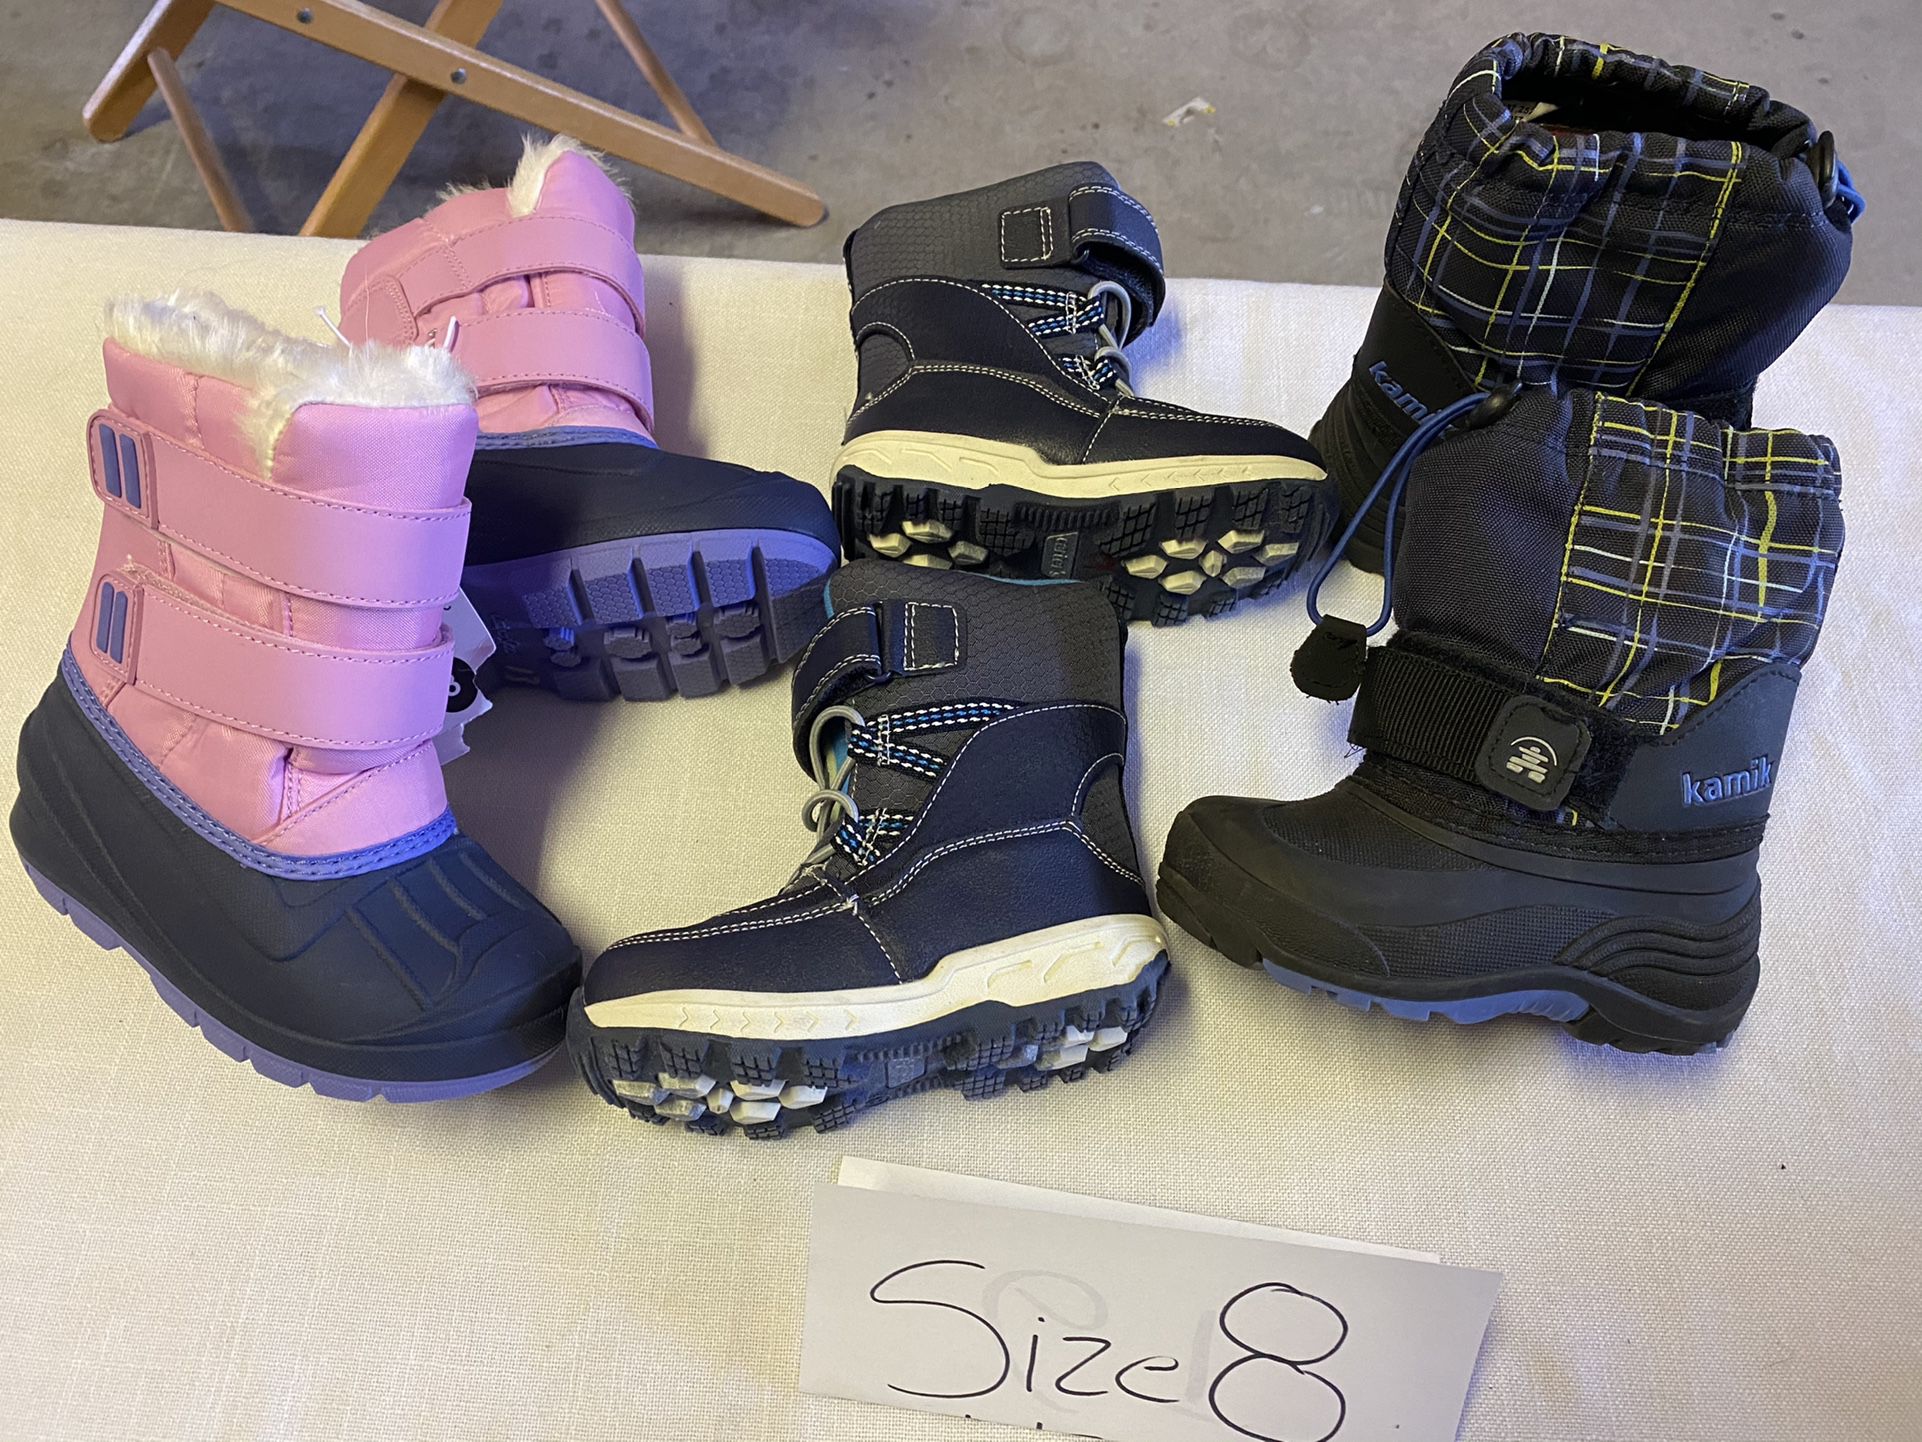 Snow Boots Size 8t $20 Each